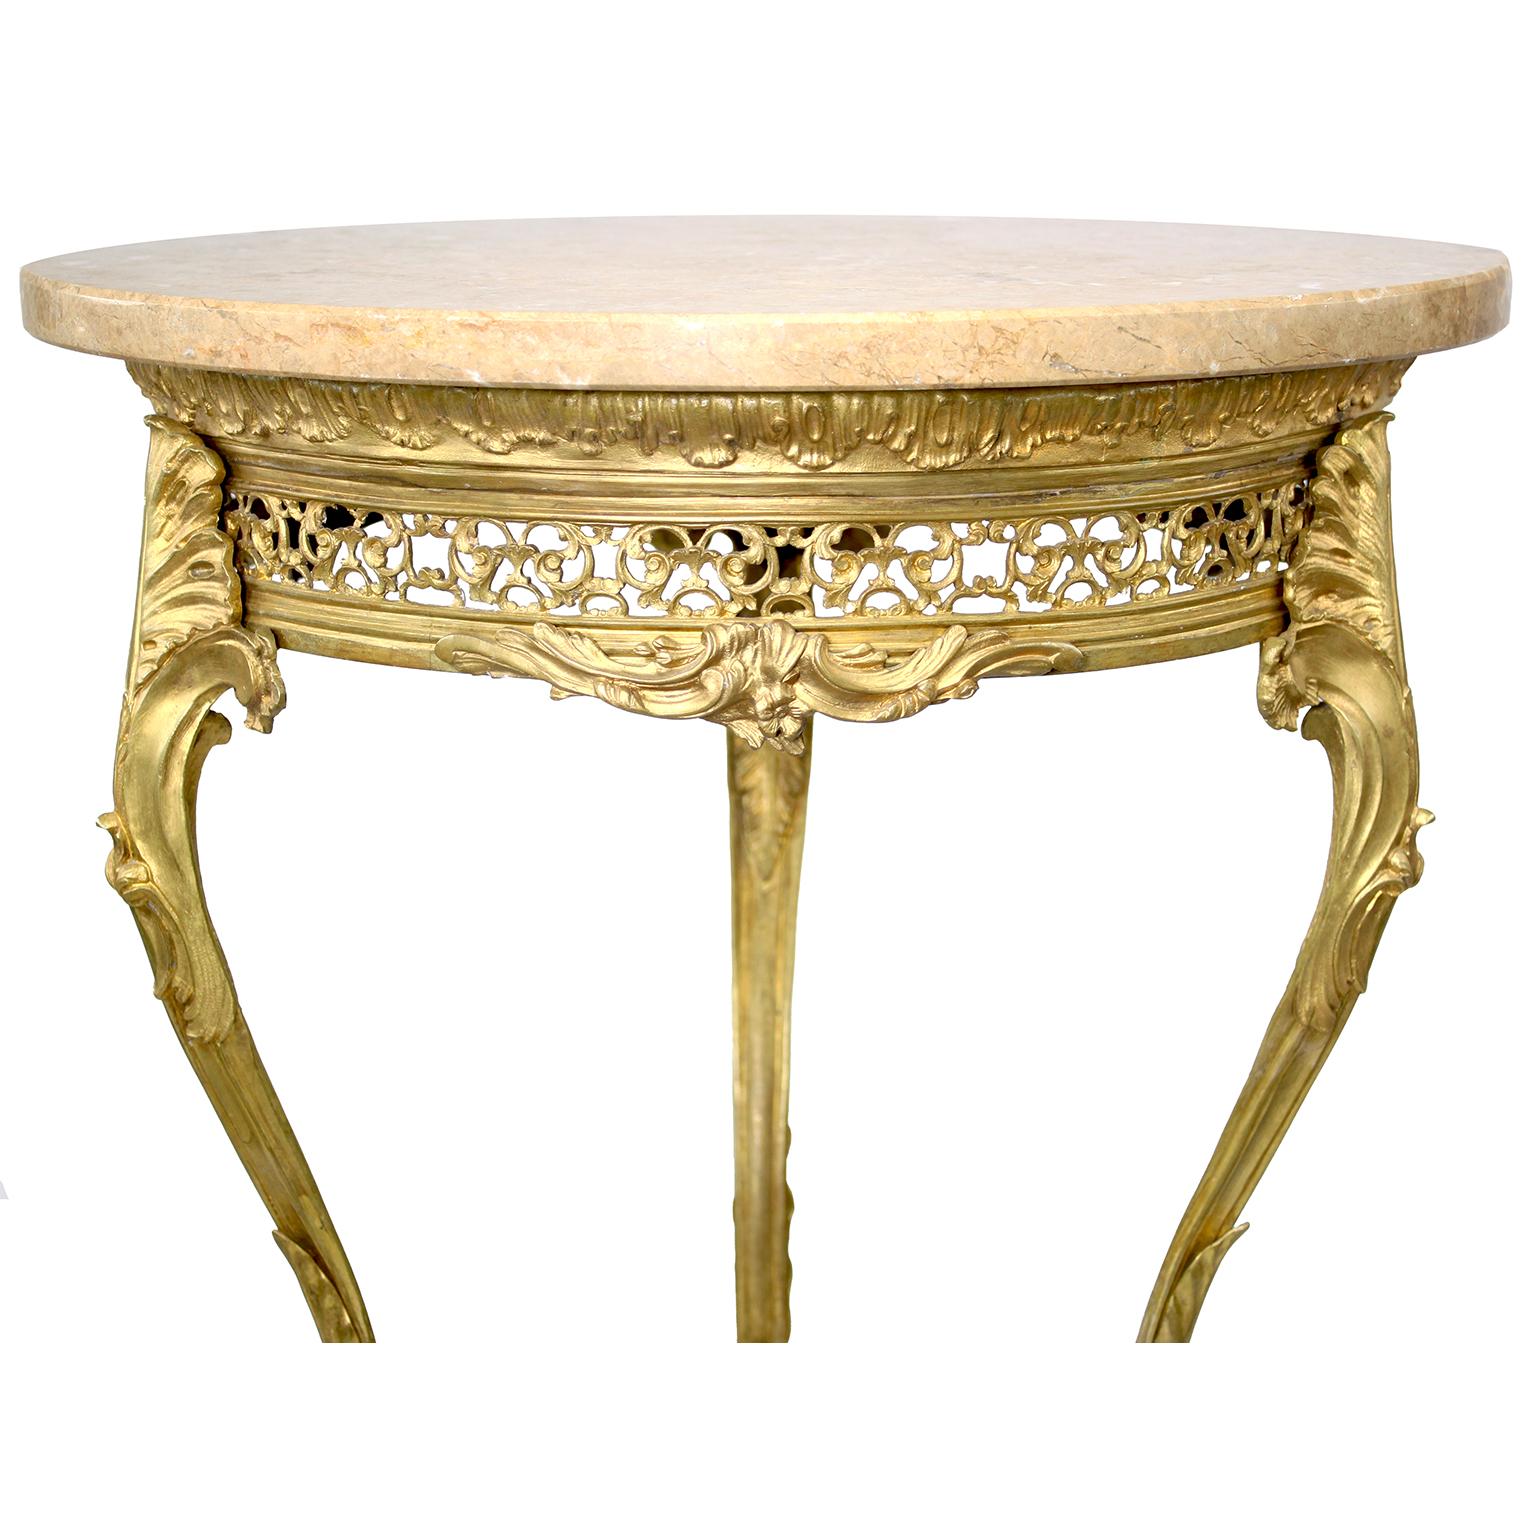 A French Belle Époque Louis XV Style Gilt-Bronze Gueridon Table with Marble Top In Good Condition For Sale In Los Angeles, CA